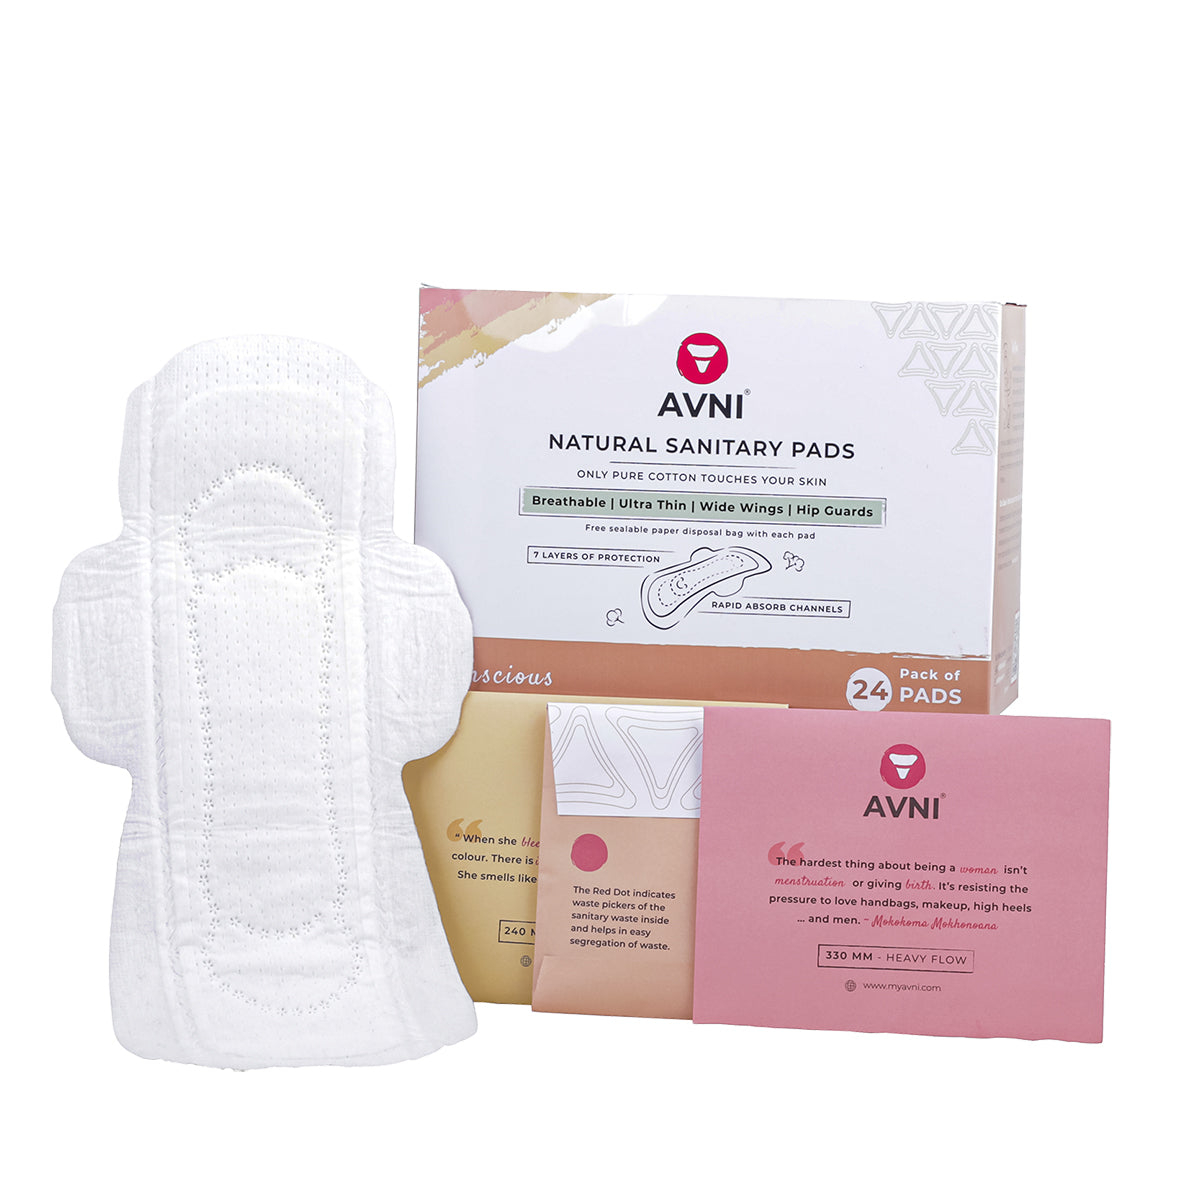 Natural Cotton Sanitary Pads - Value Pack of 24 Pads